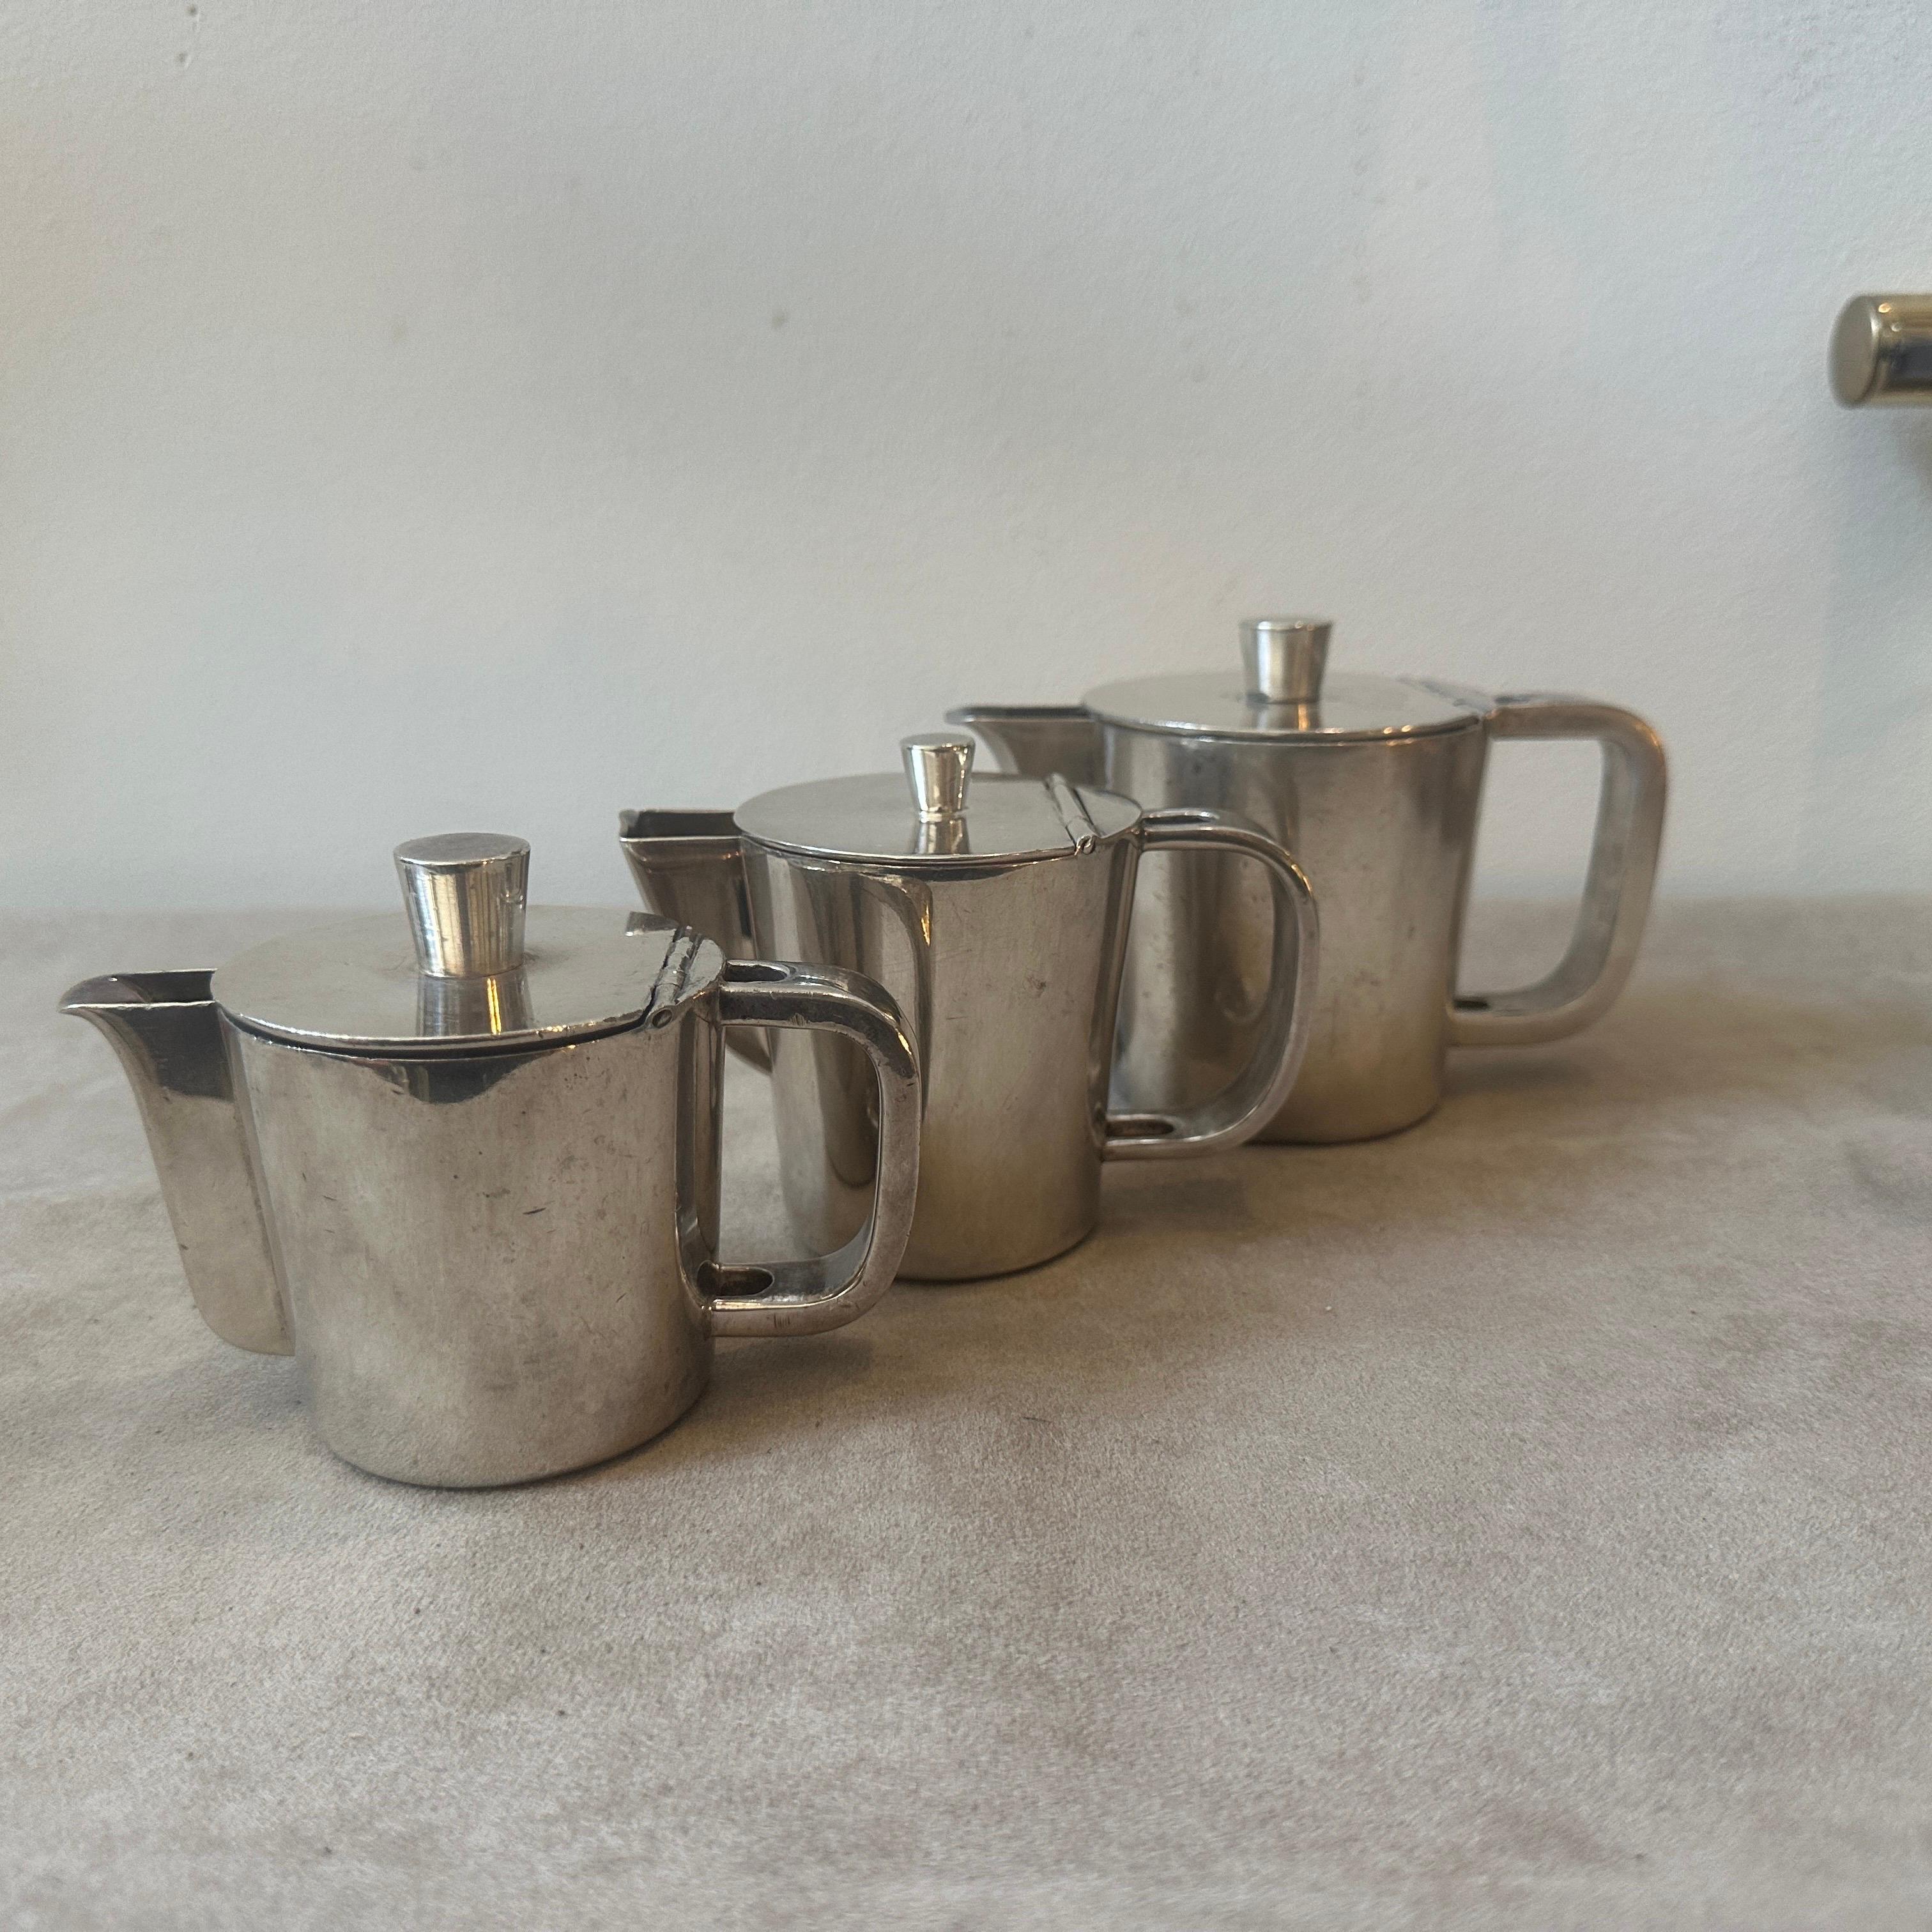 A set of three alpaca coffee pot designed by Gio Ponti and manufactured by Krupp Milano in the Forties, they were used in the hotels and they are marked on the bottom Krupp and Jolly Hotels Italia, they are in original conditions with normal signs